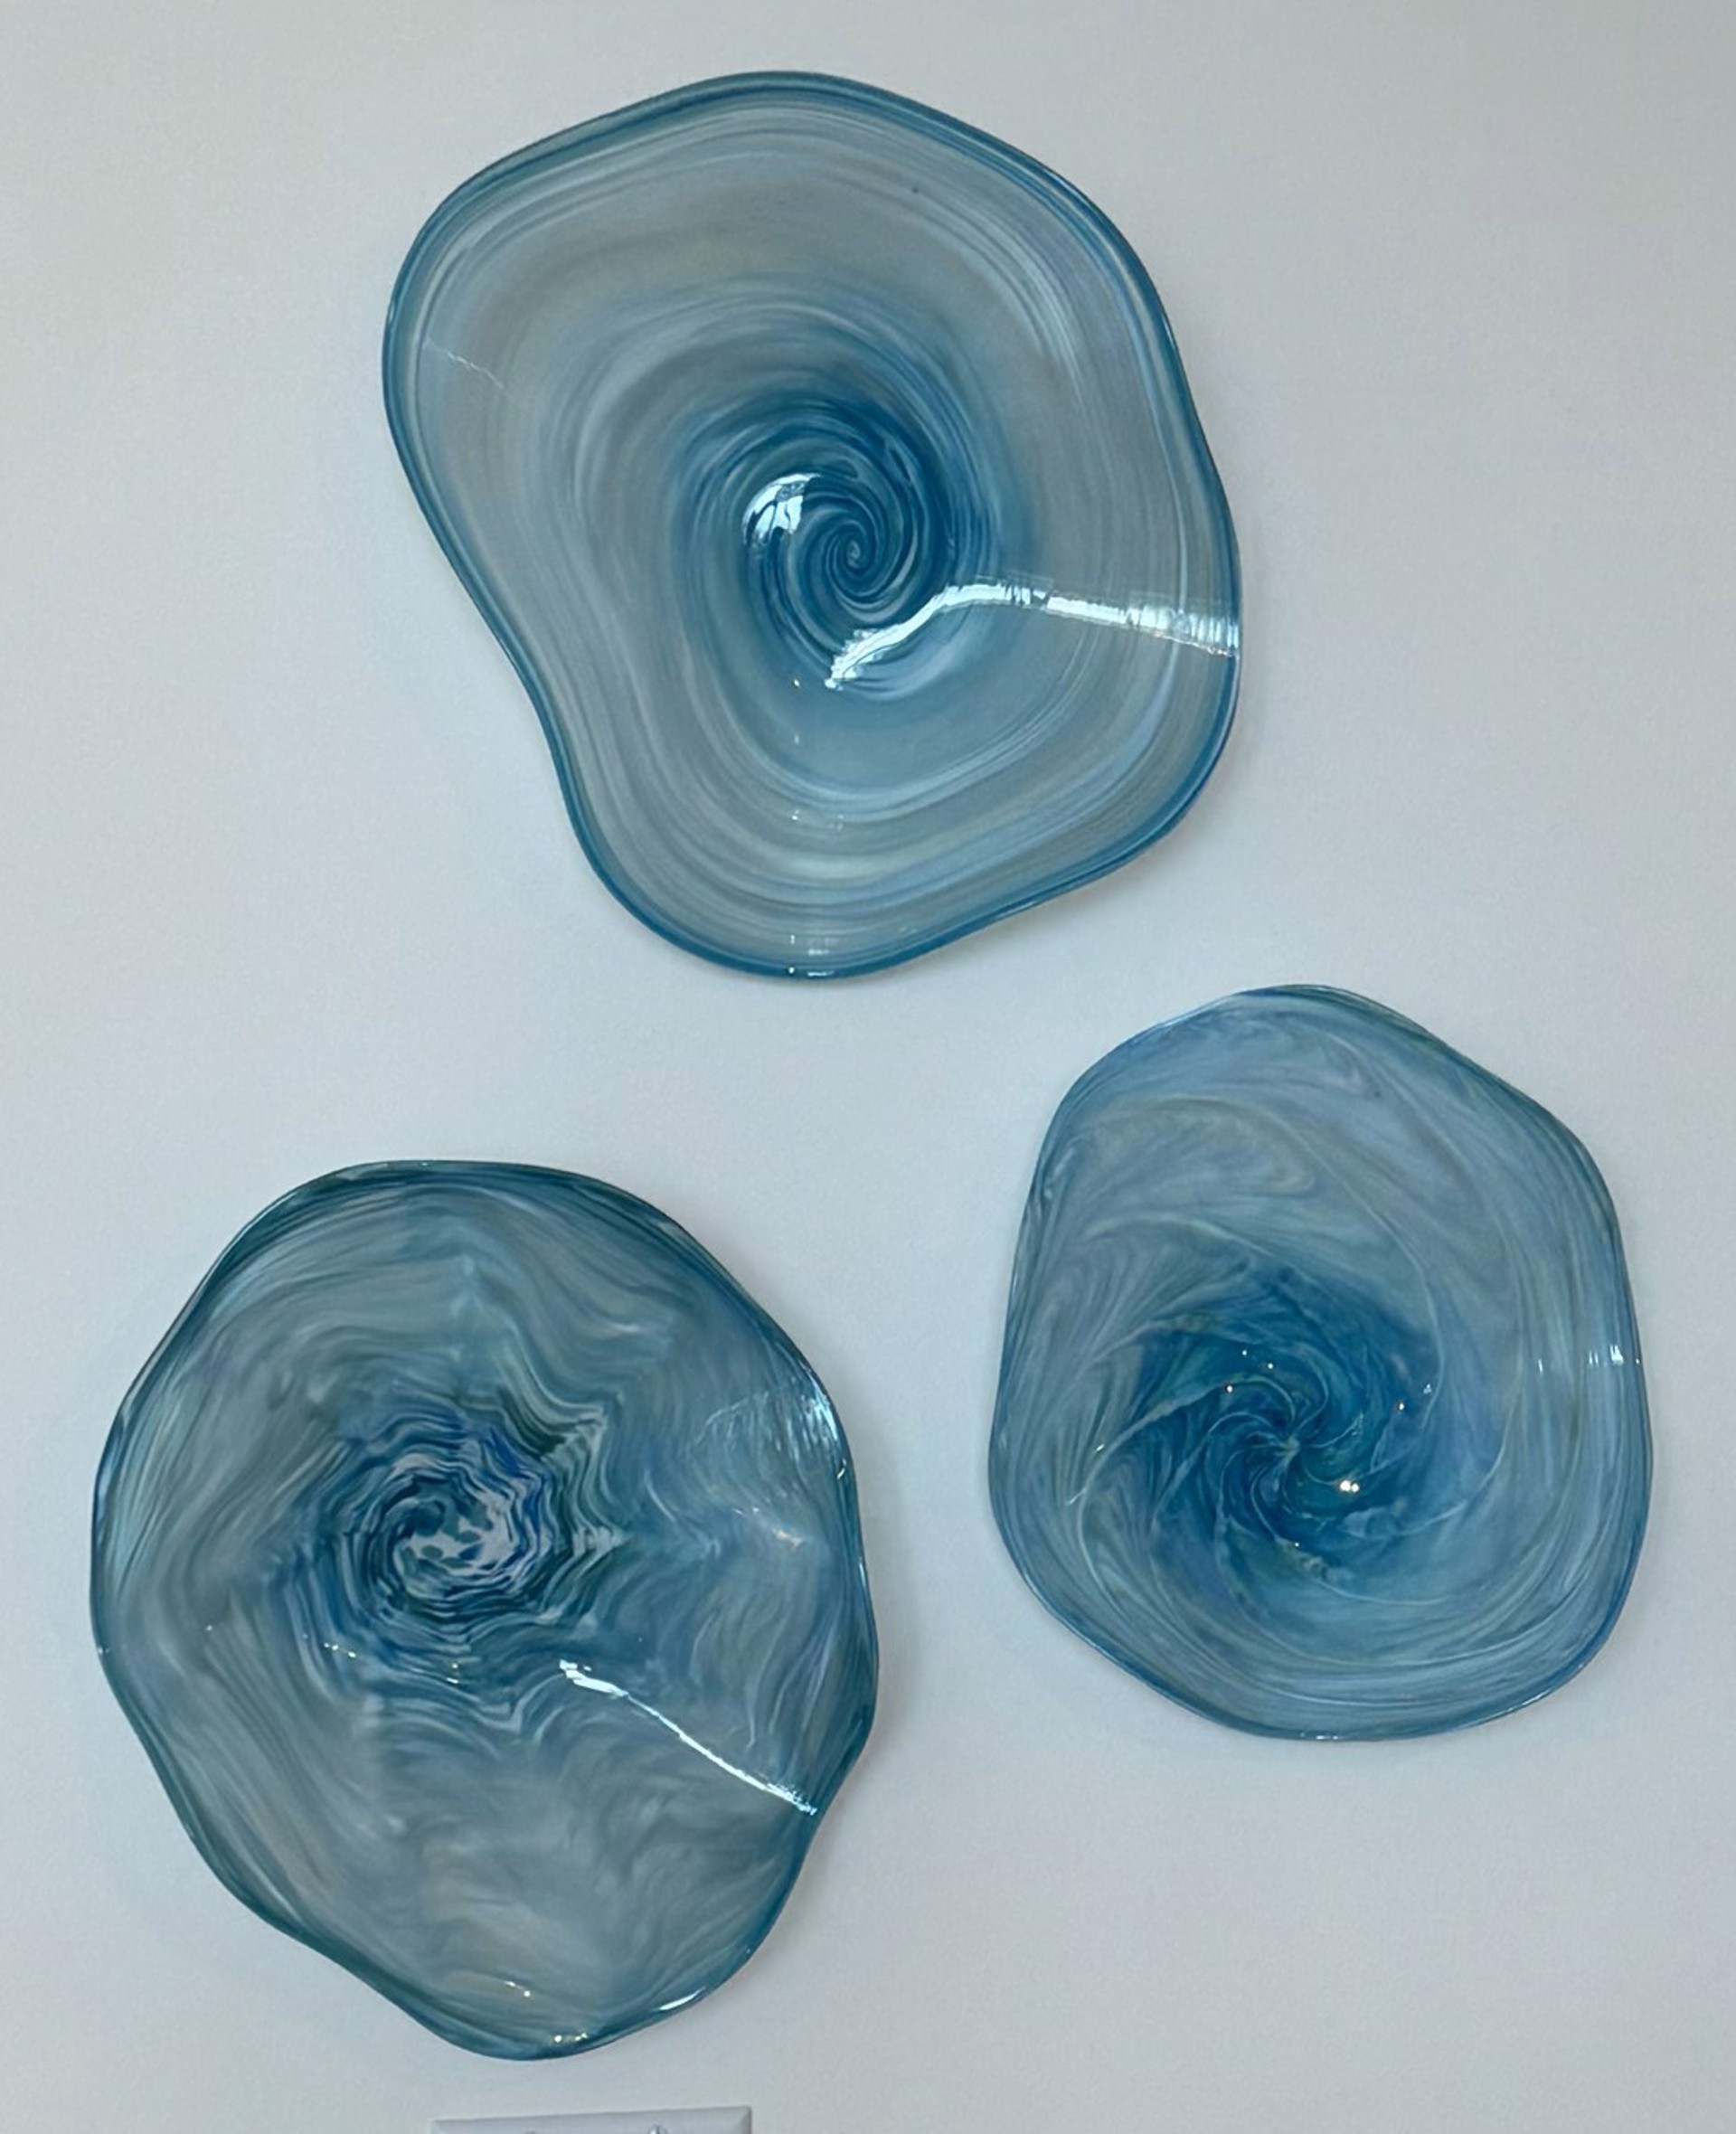 3 small blossom glass installation by T. Miller